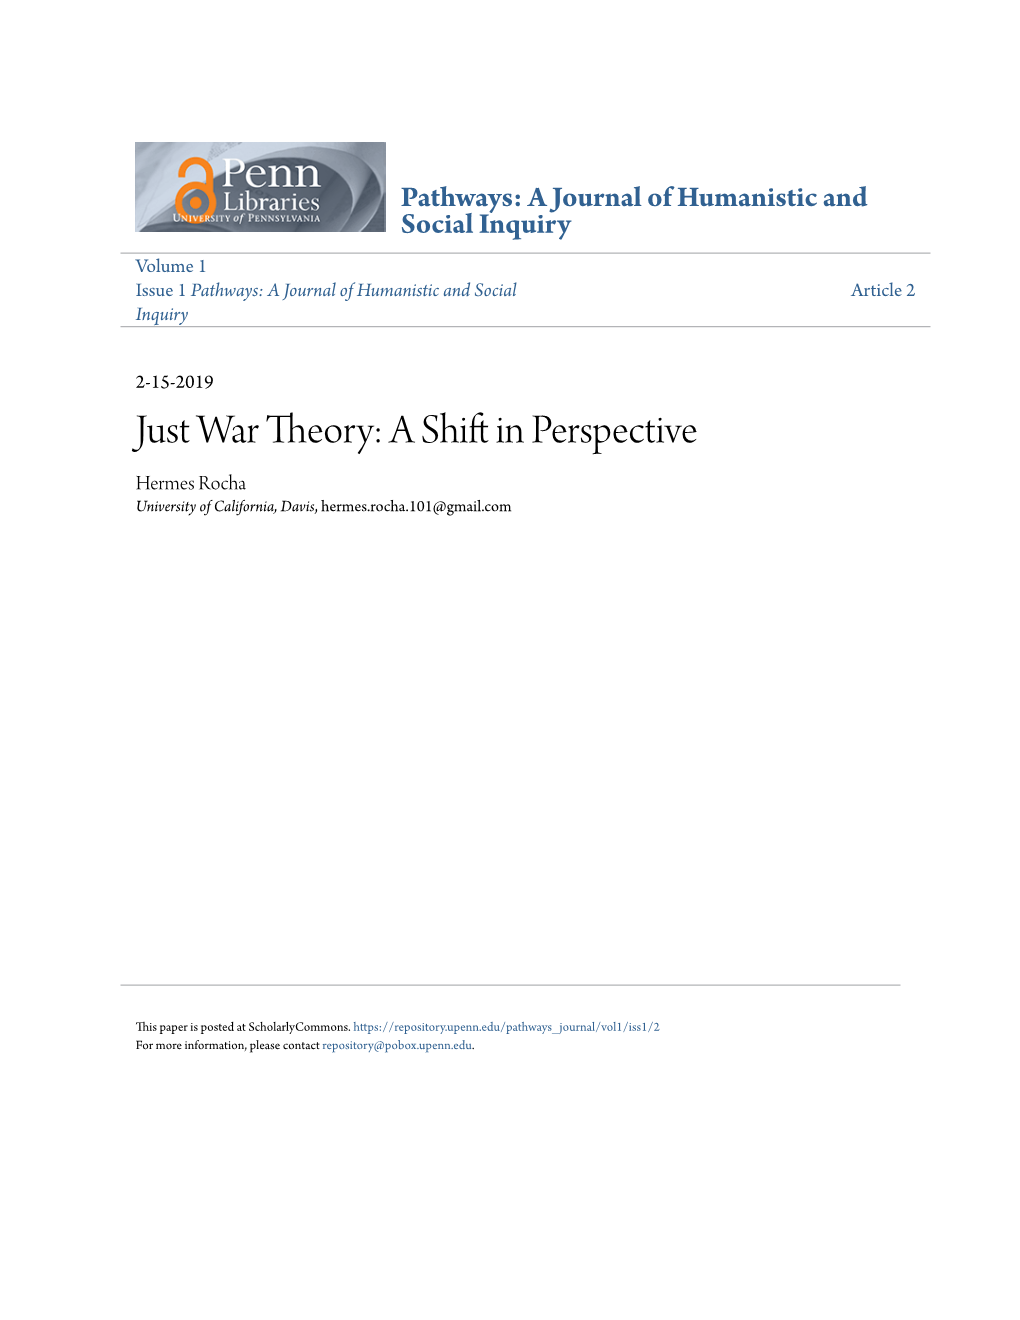 Just War Theory: a Shift in Perspective